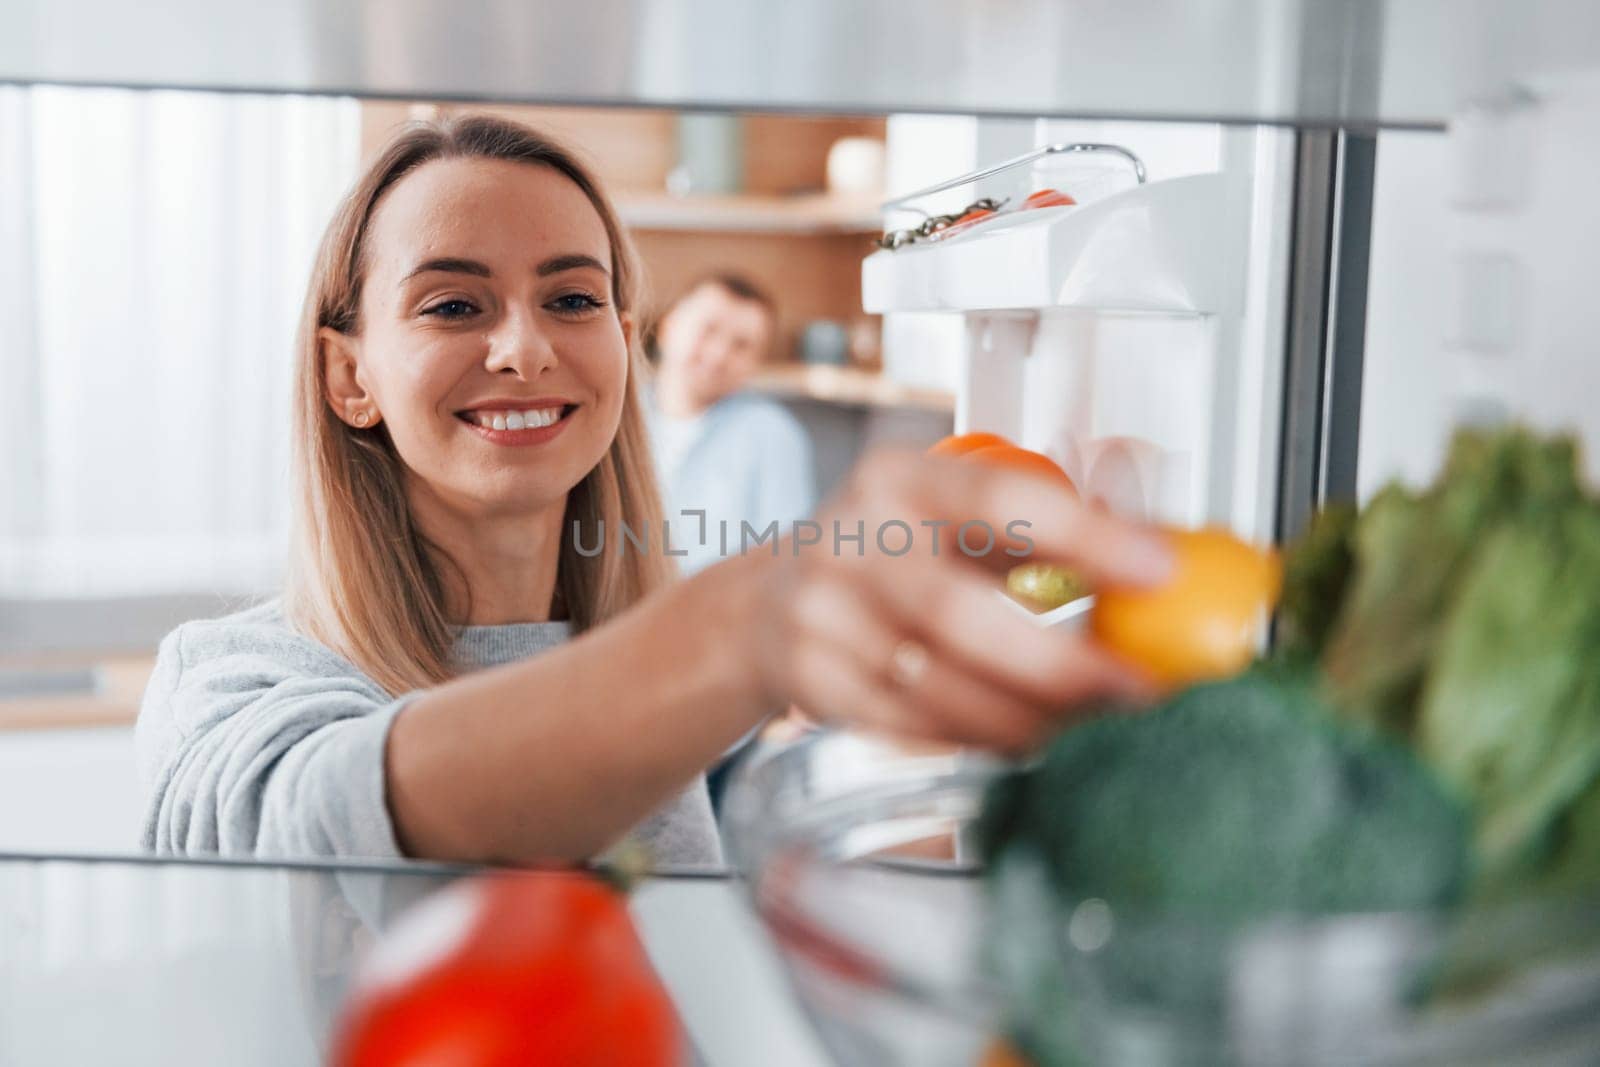 Using vegetables. Couple preparing food at home on the modern kitchen.